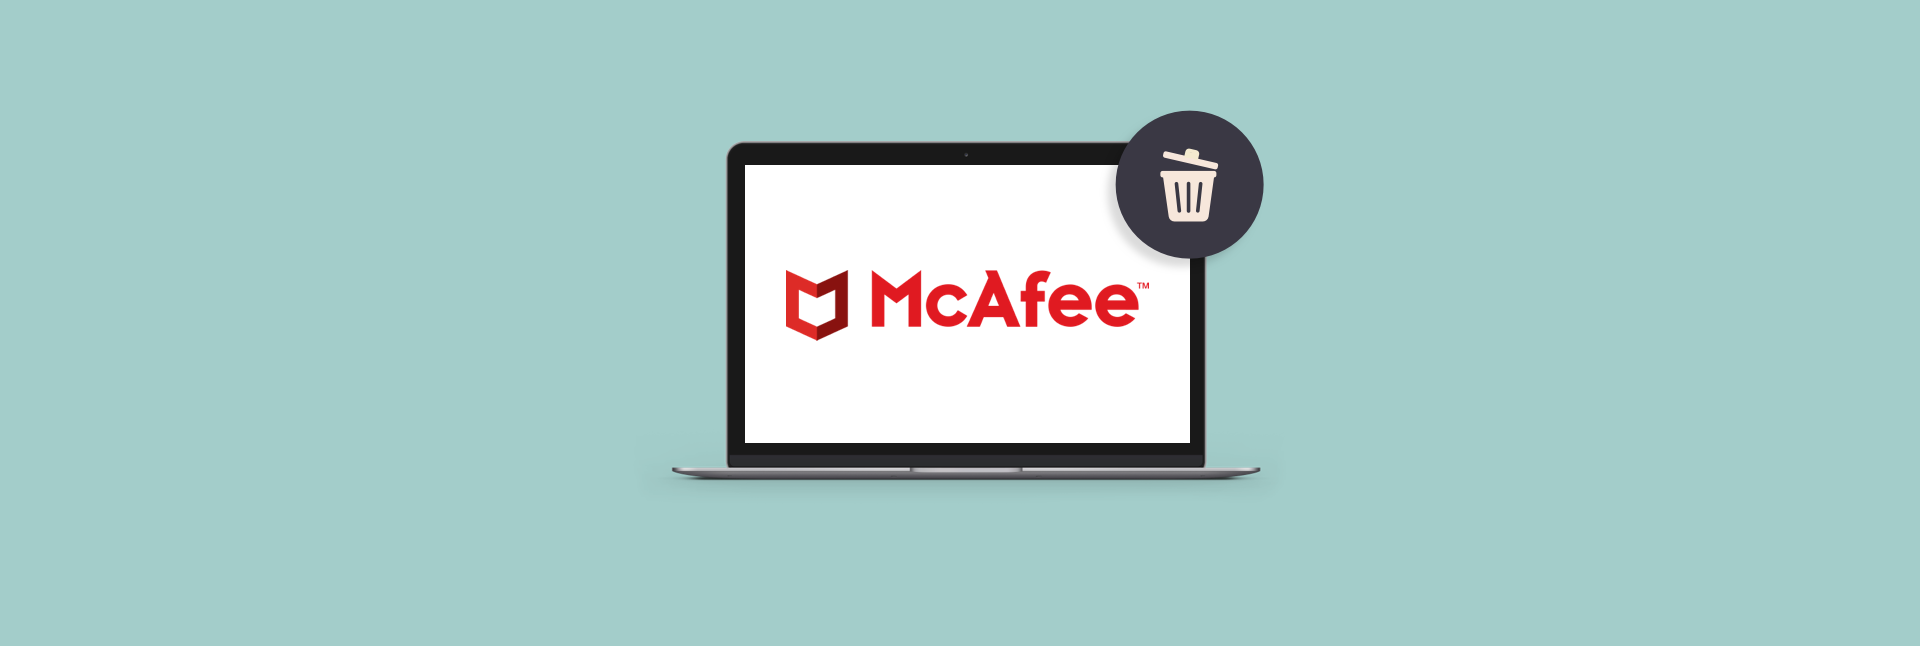 enterprise systems group to remove mcafee virus protection